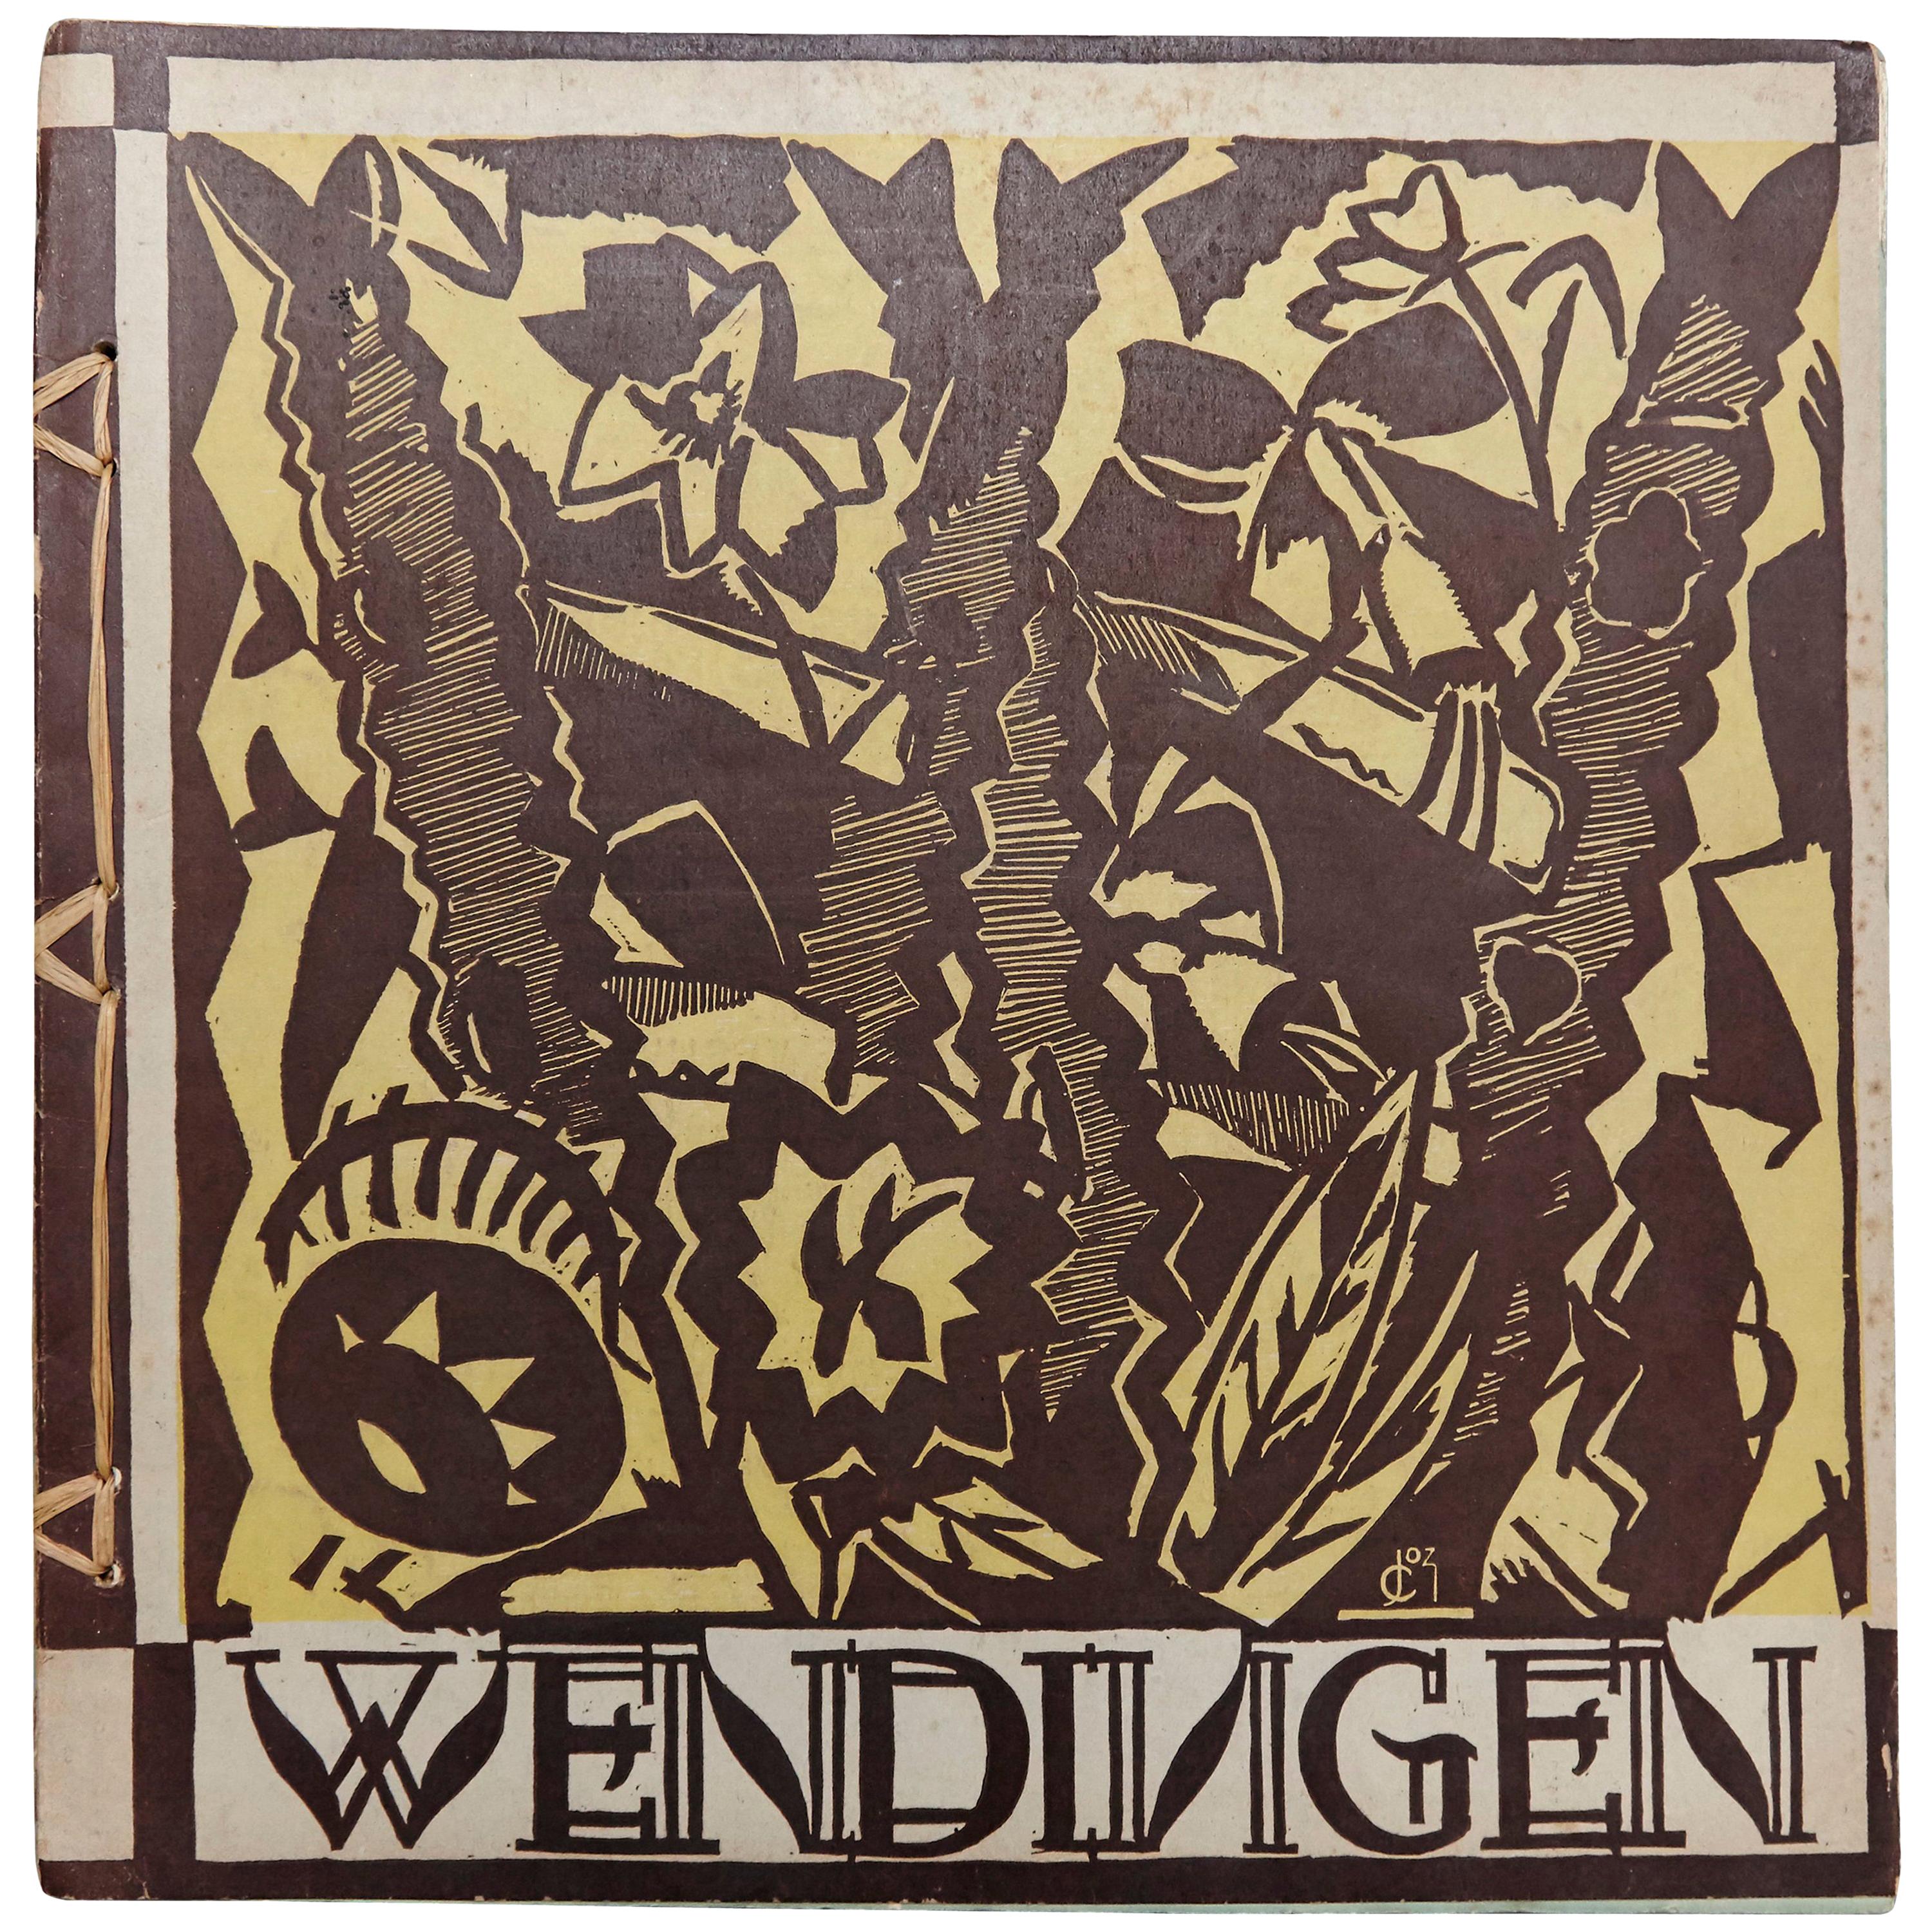 Wendingen, Issue 5, Cover by Josef Cantré, 1920 For Sale